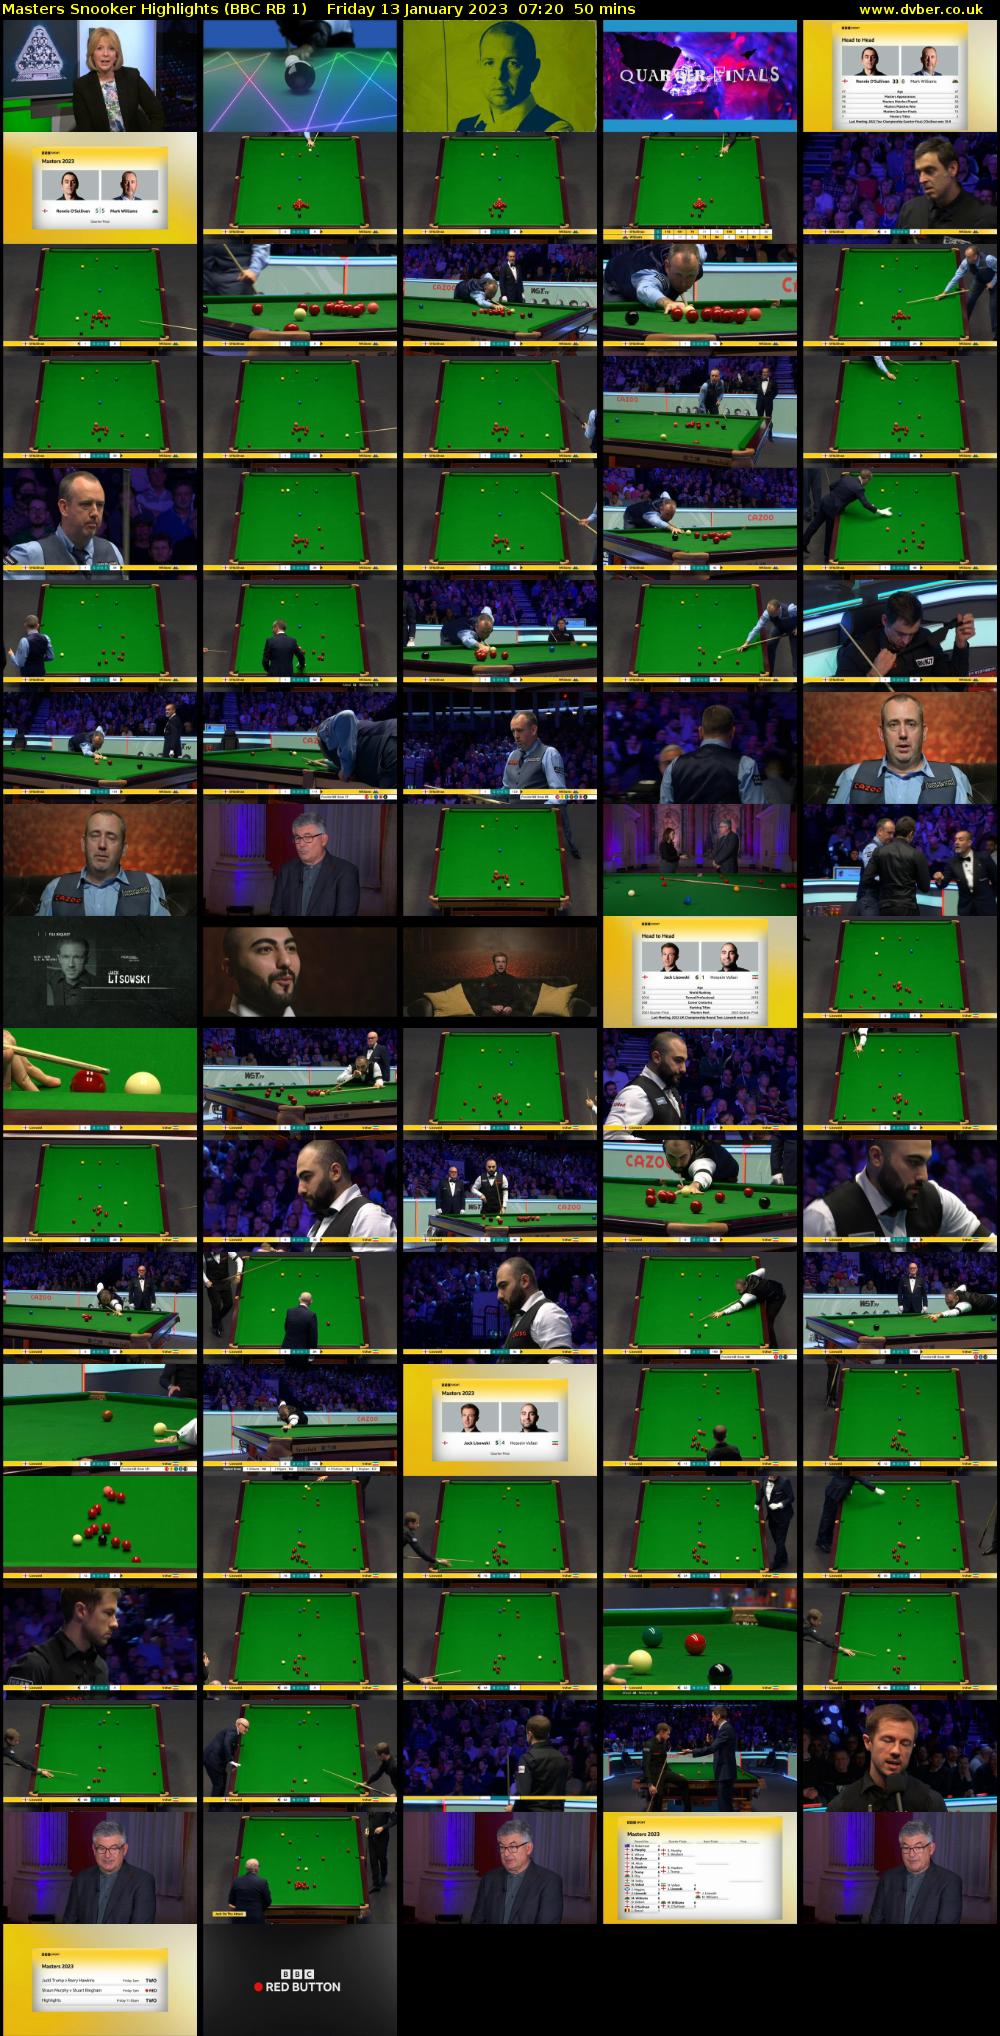 Masters Snooker Highlights (BBC RB 1) Friday 13 January 2023 07:20 - 08:10